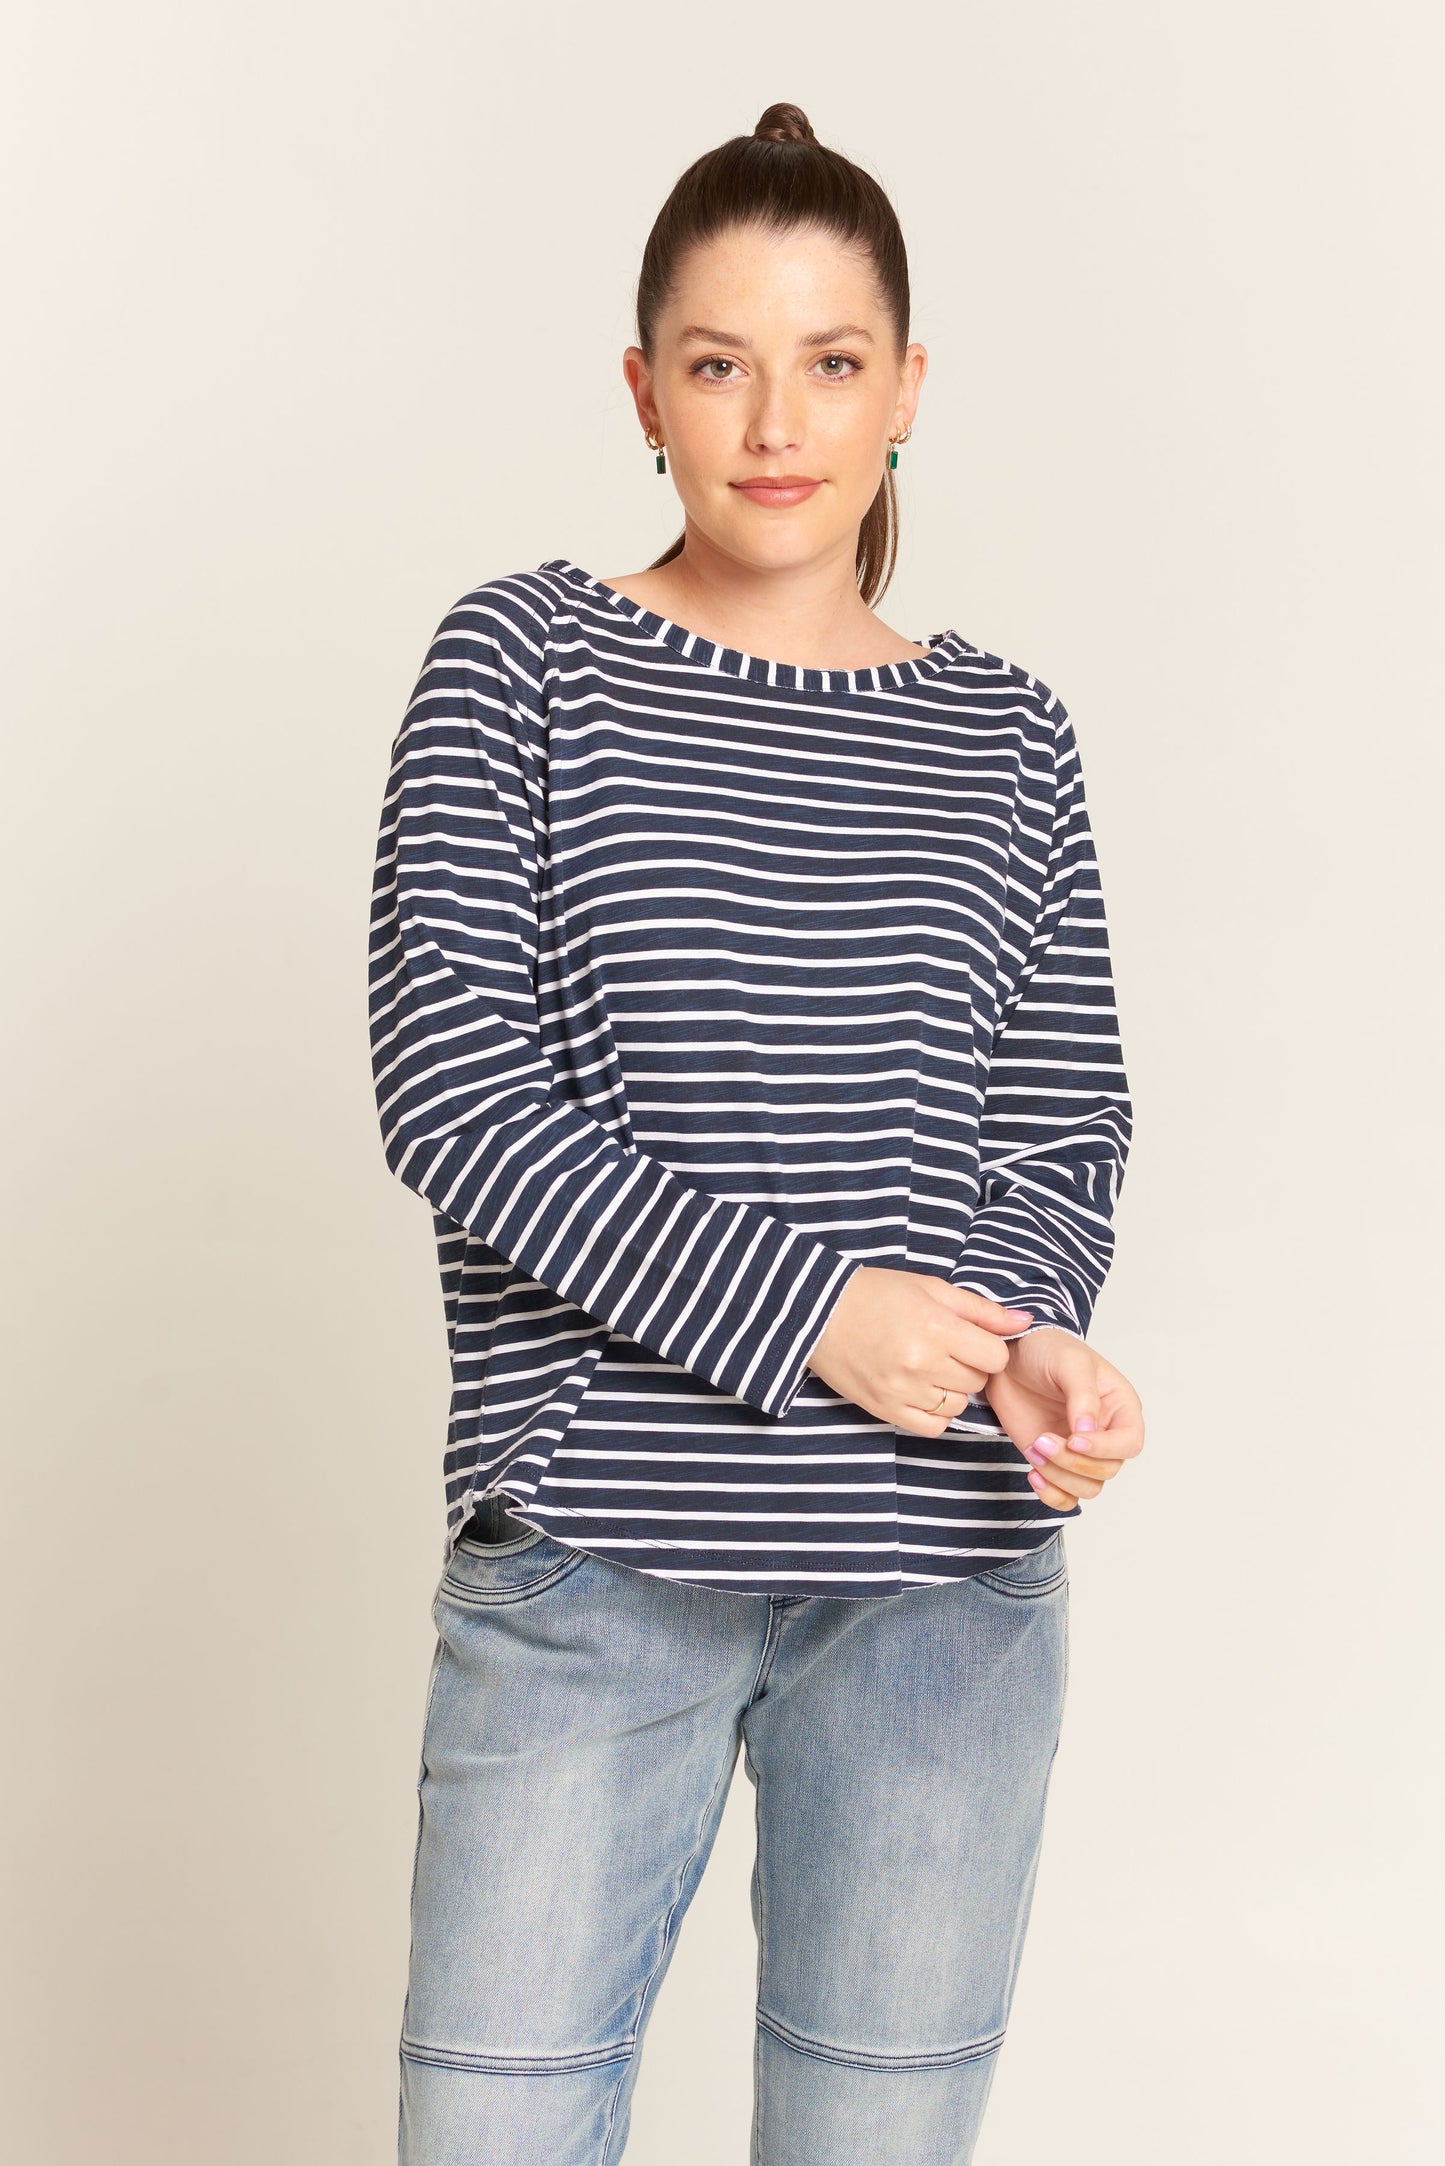 Cloth Paper Scissors Long Sleeve Wide Stripe Print White/Navy | CPS1357-12